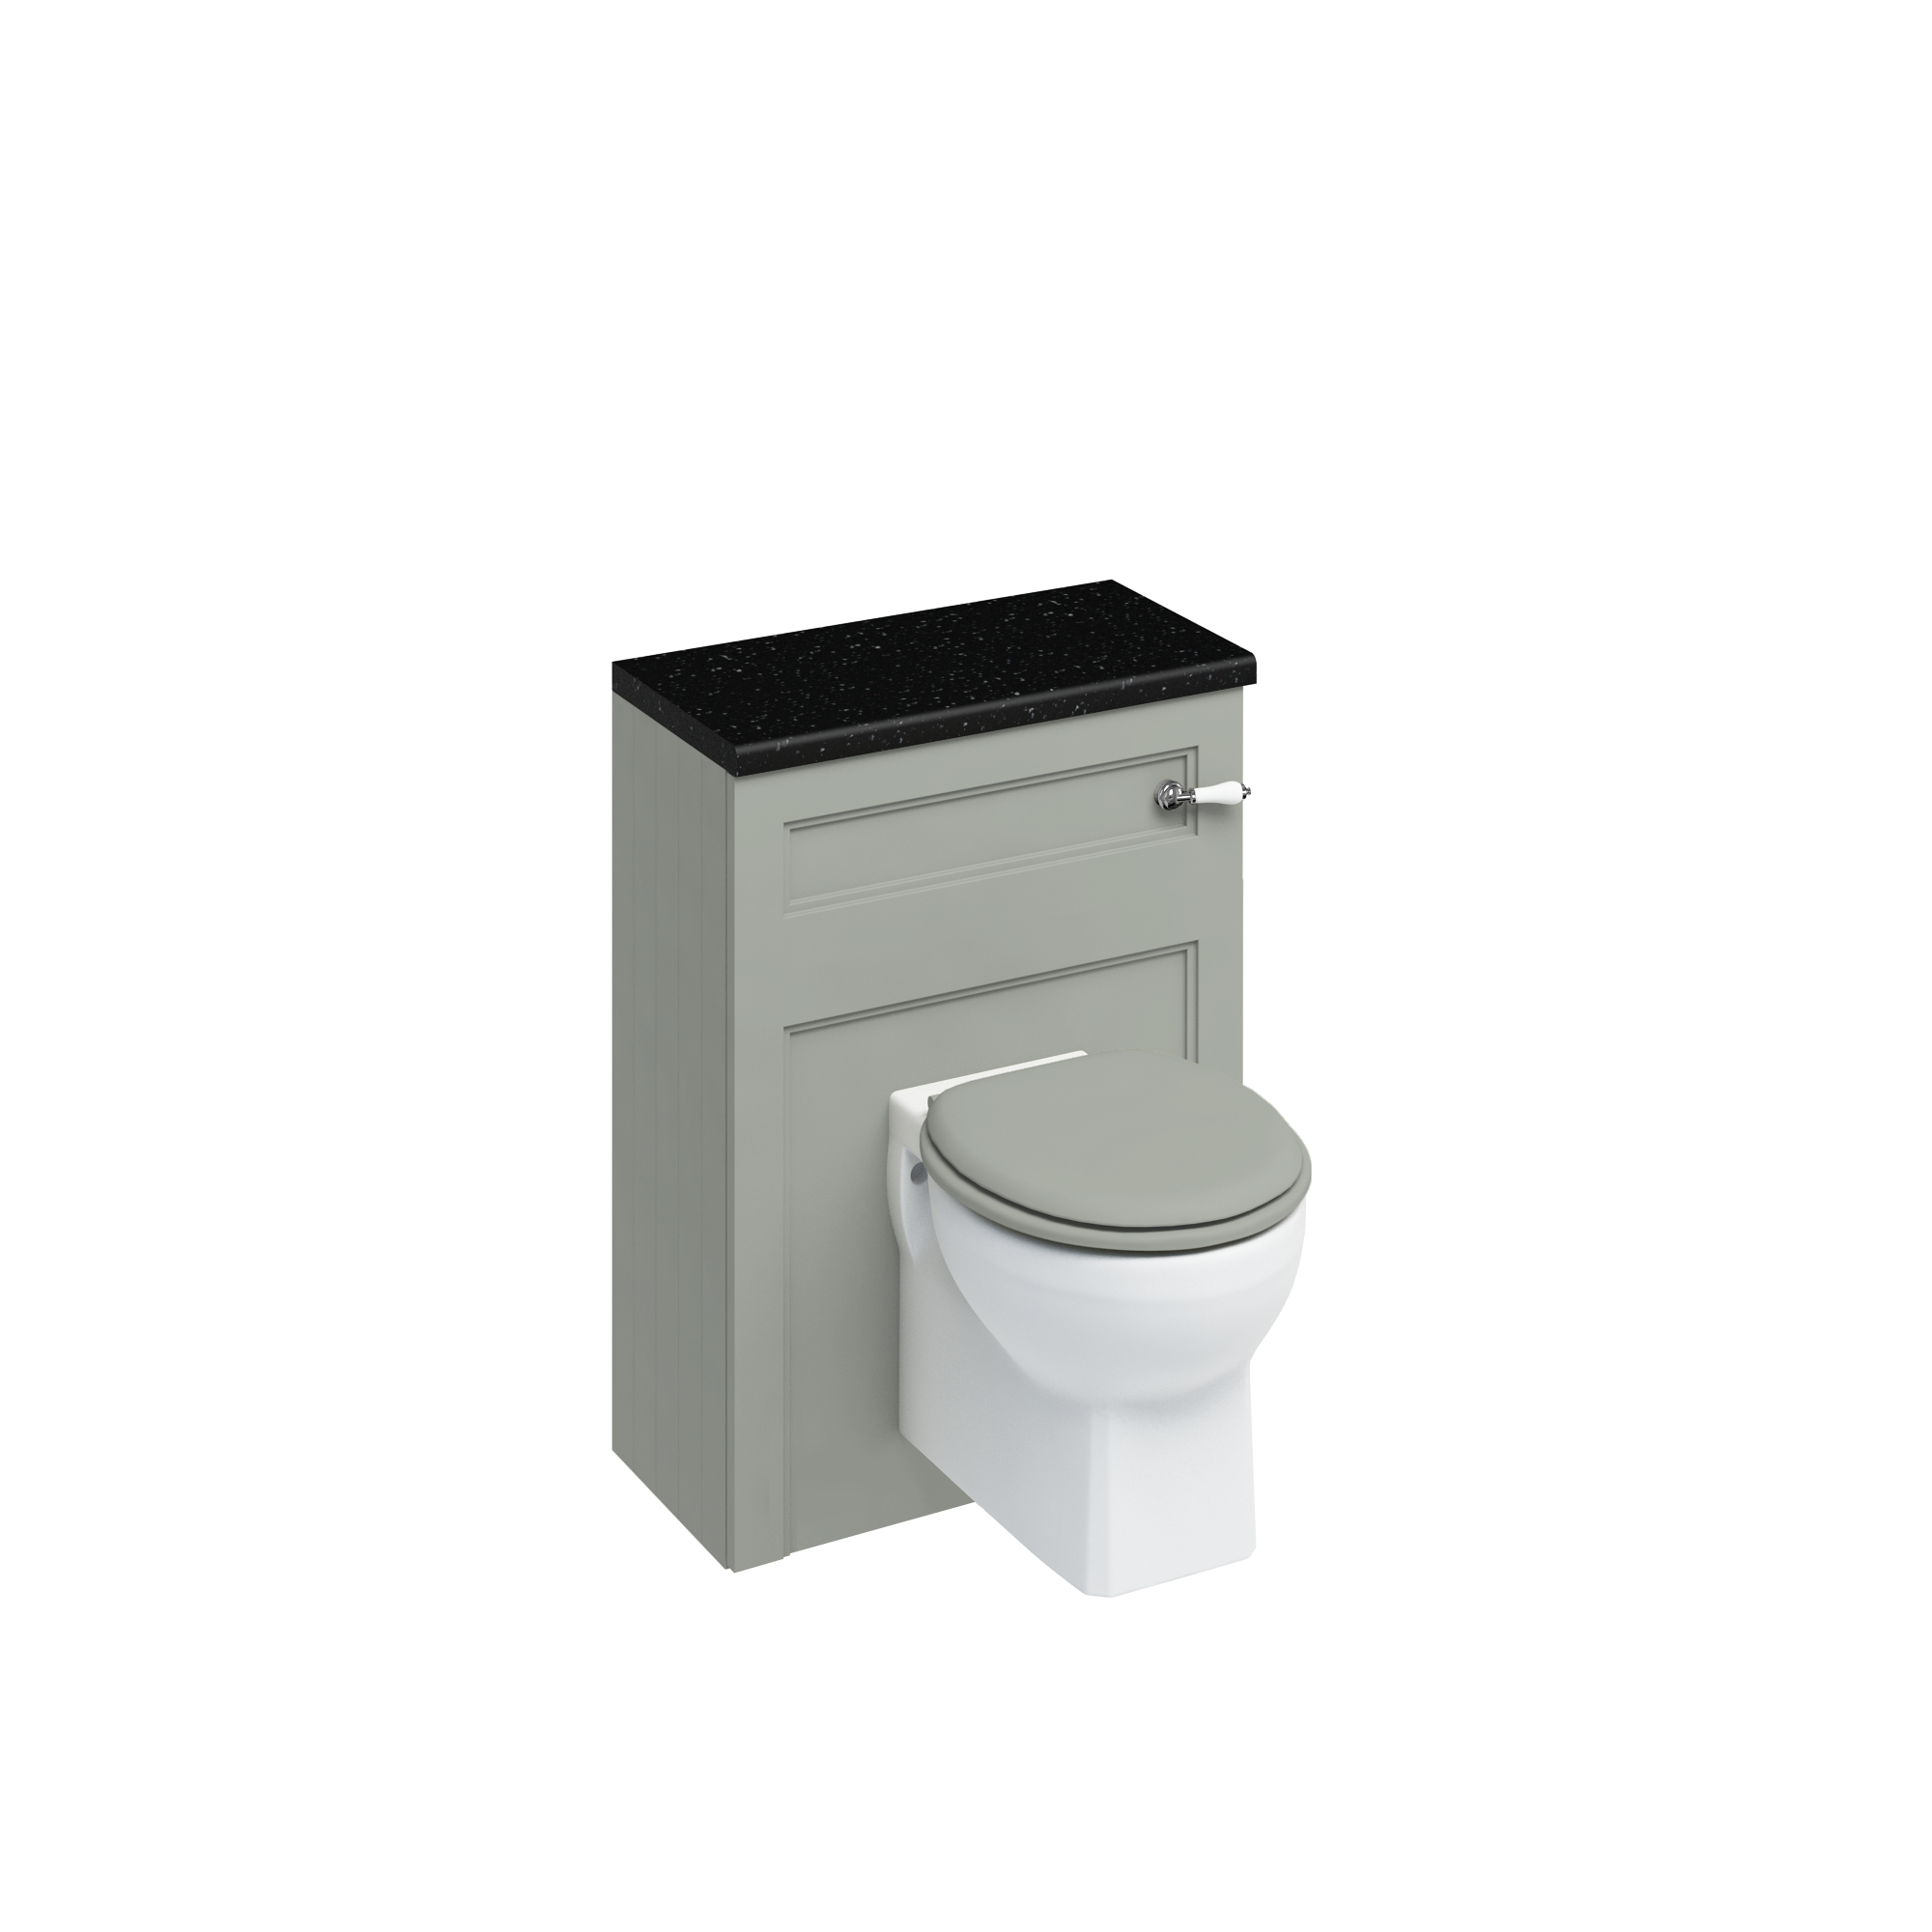 60 Wall hung WC Unit (including the cistern tank - lever flush )